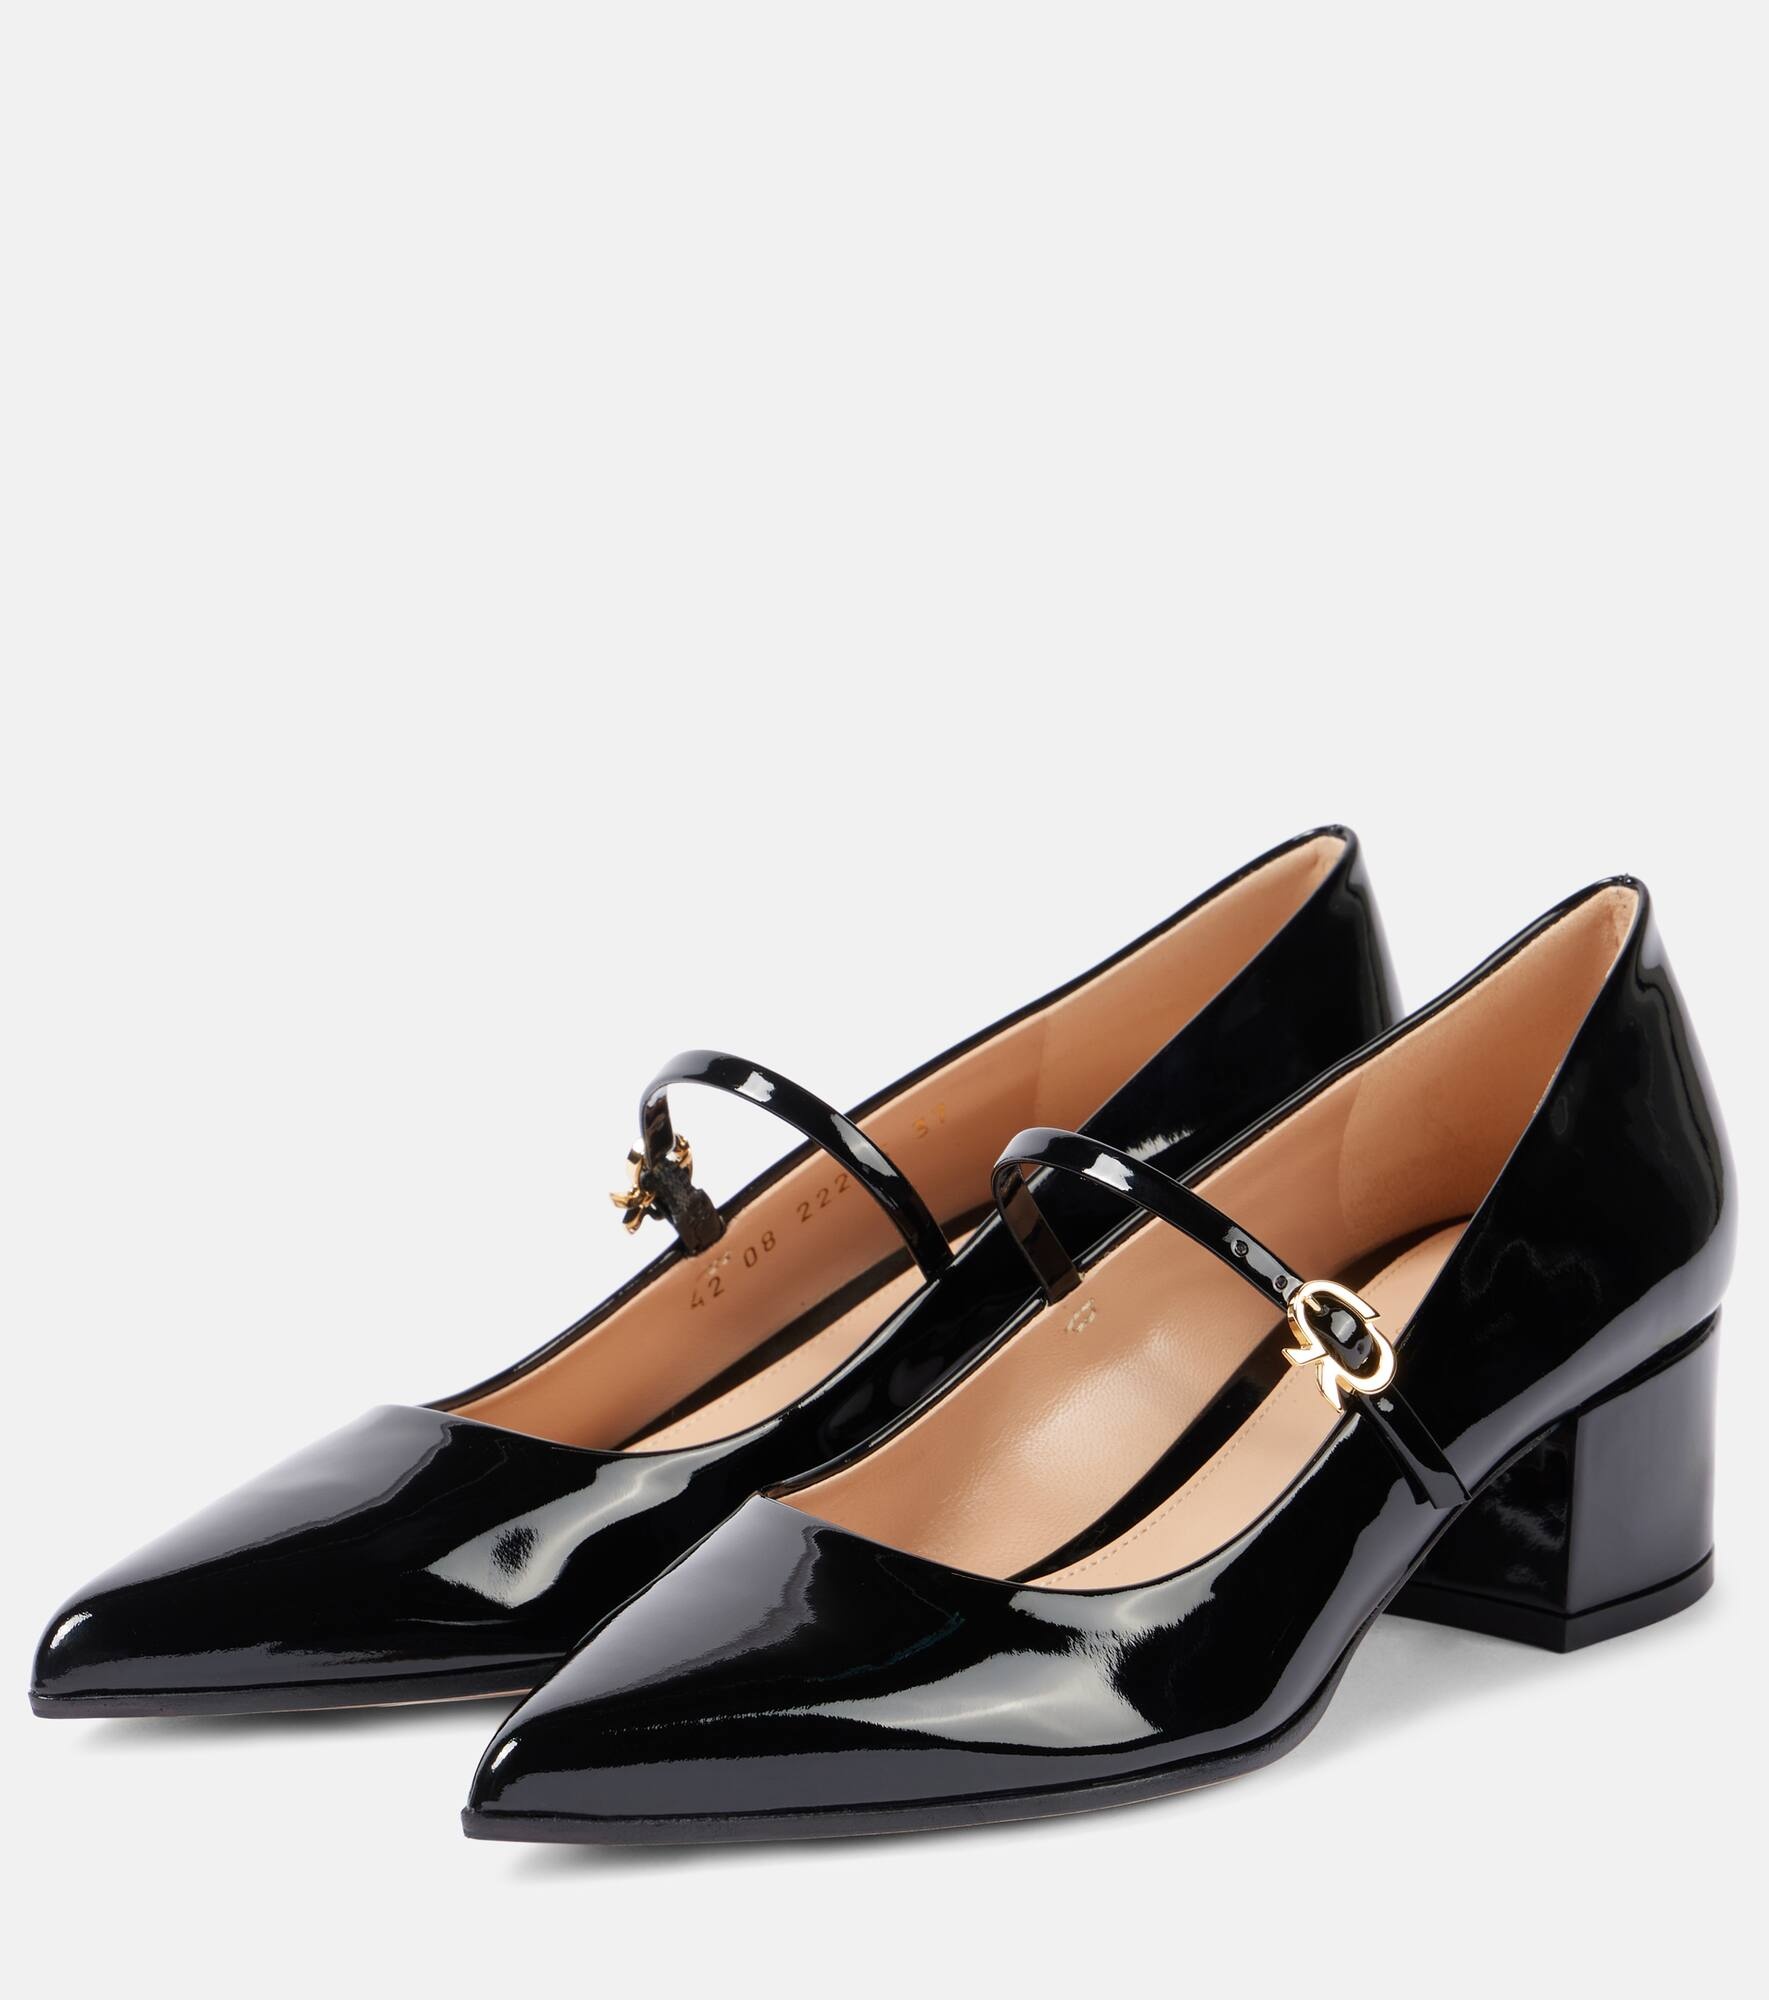 Ribbon patent leather Mary Jane pumps - 5